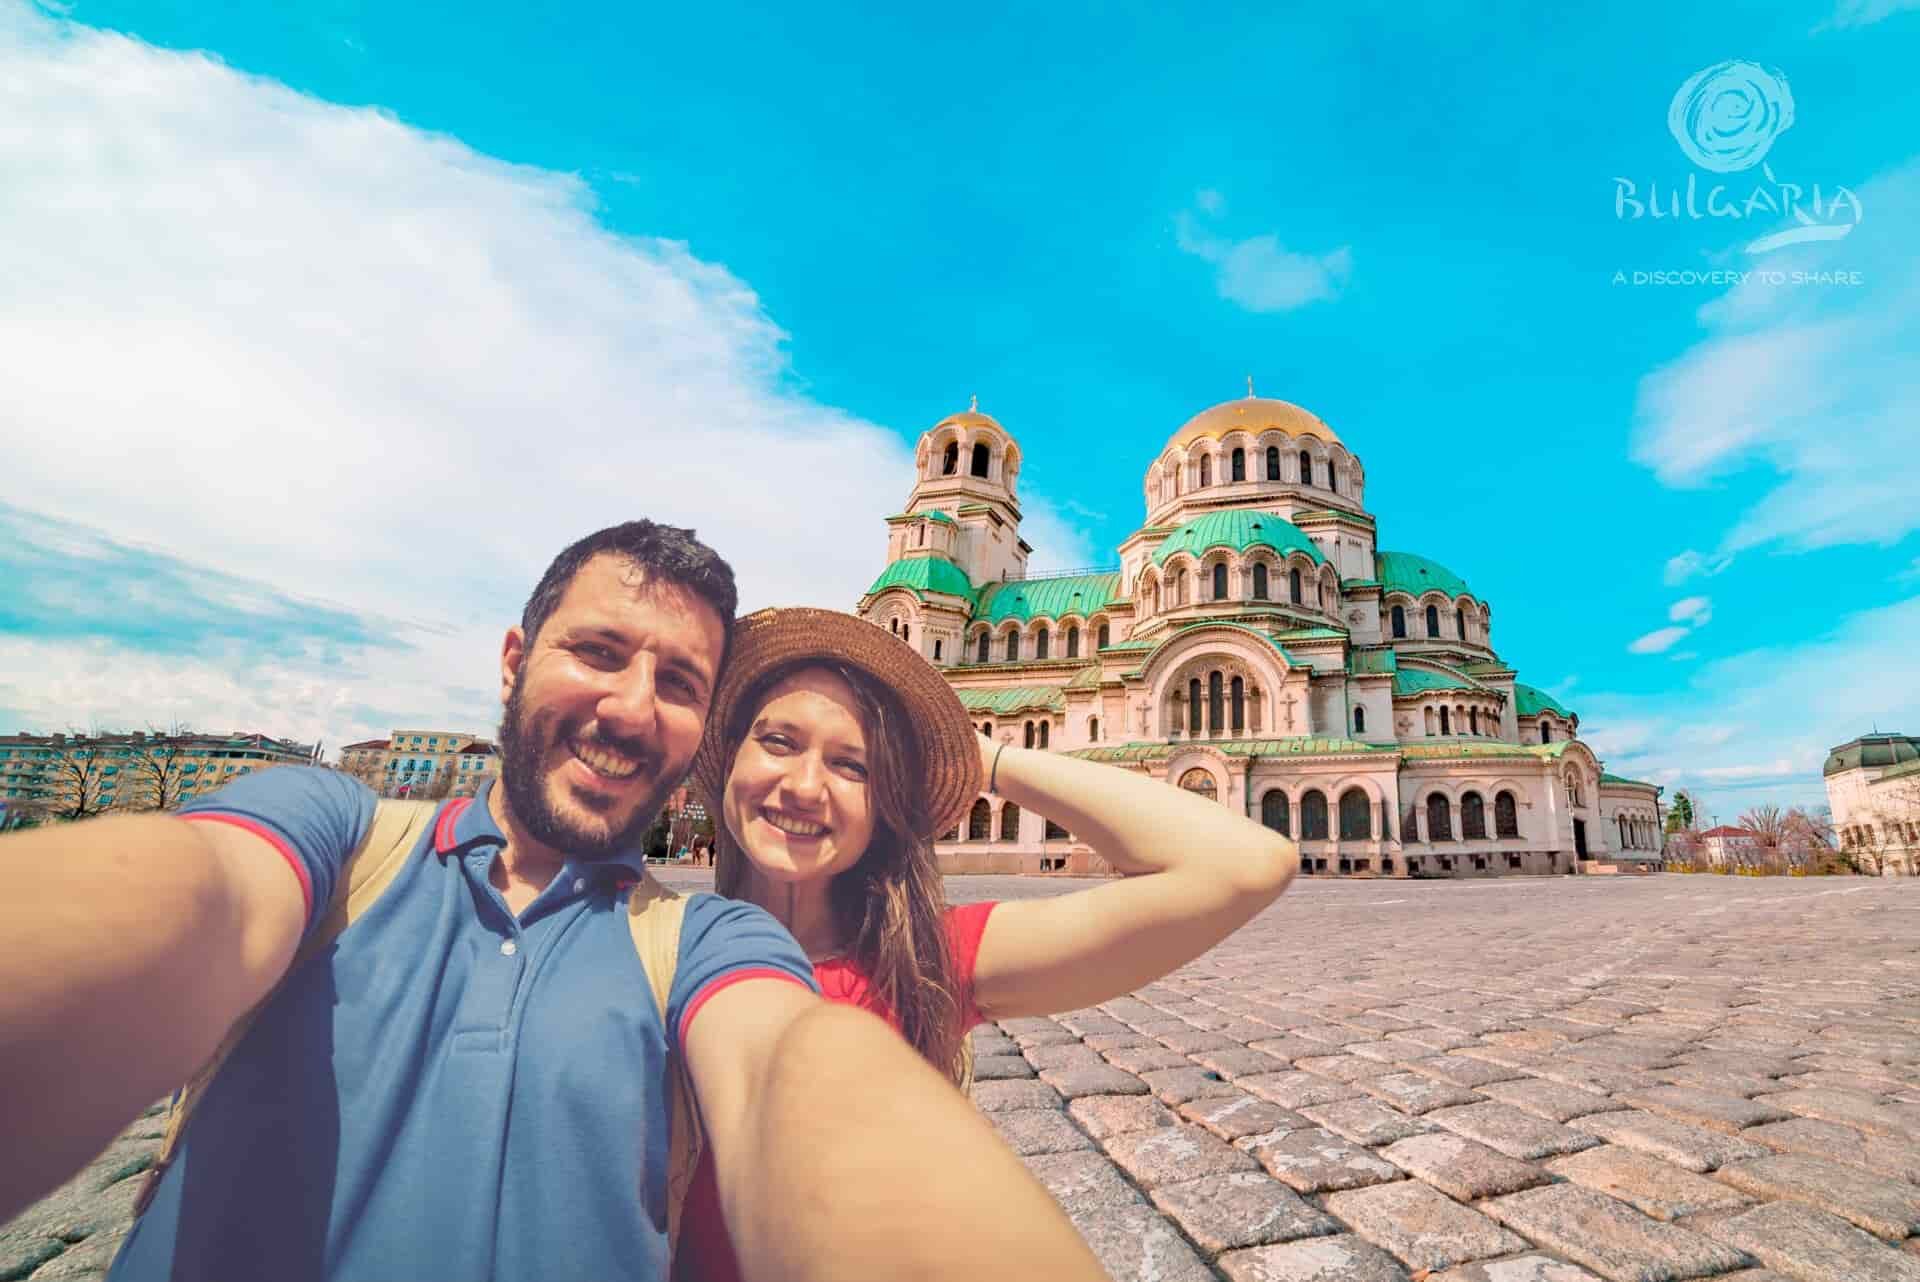 A couple smiling and taking a selfie in front of a beautiful church.